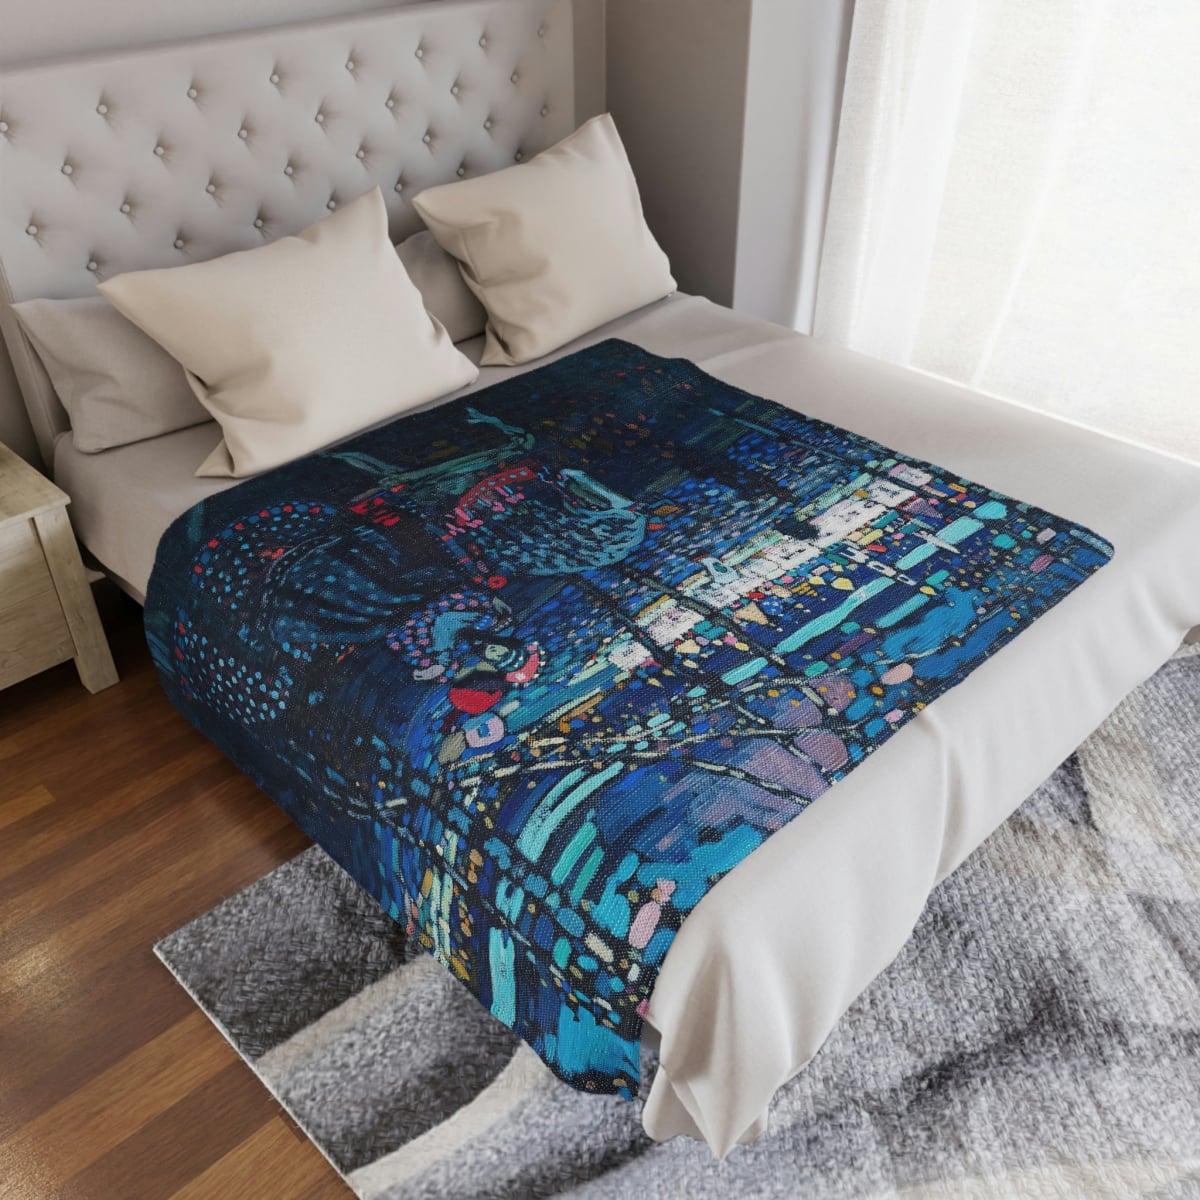 Kandinsky Art Blanket - Perfect addition to your home decor